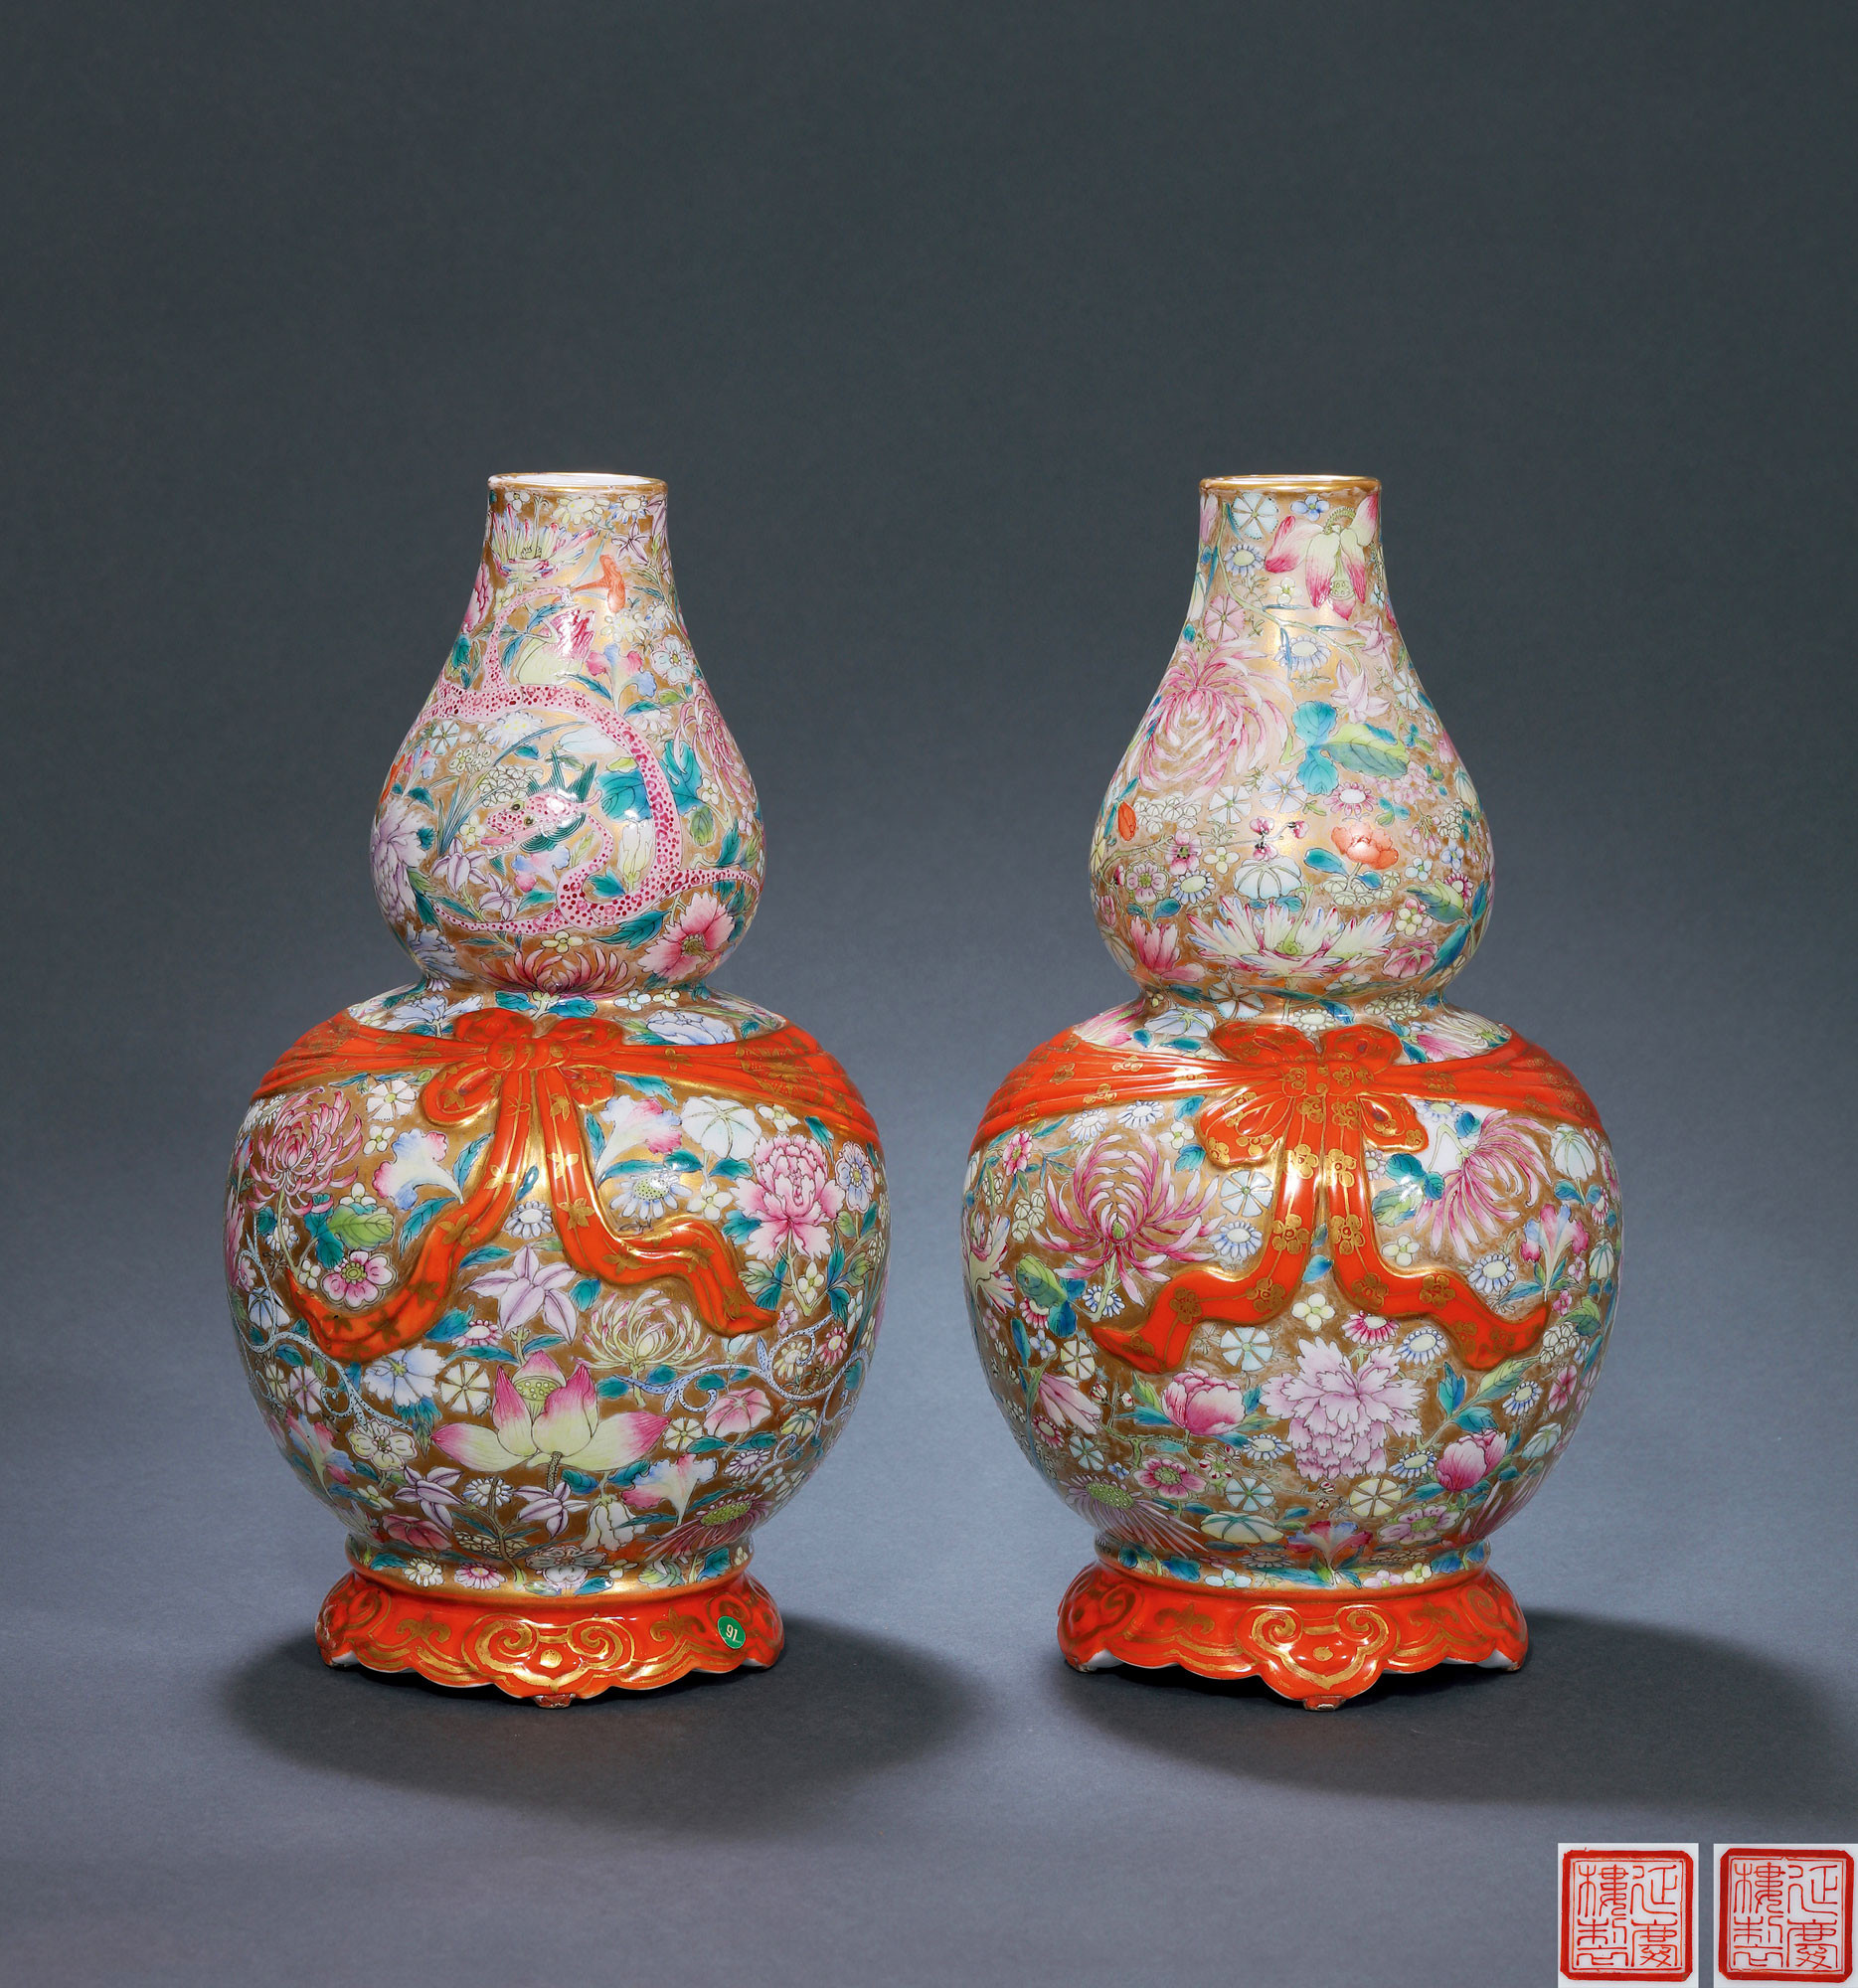 A PAIR OF FAMILLE-ROSE AND GILTED VASE IN SHAPE OF DOUBLE-GOURD WITH FLOWER DESIGN